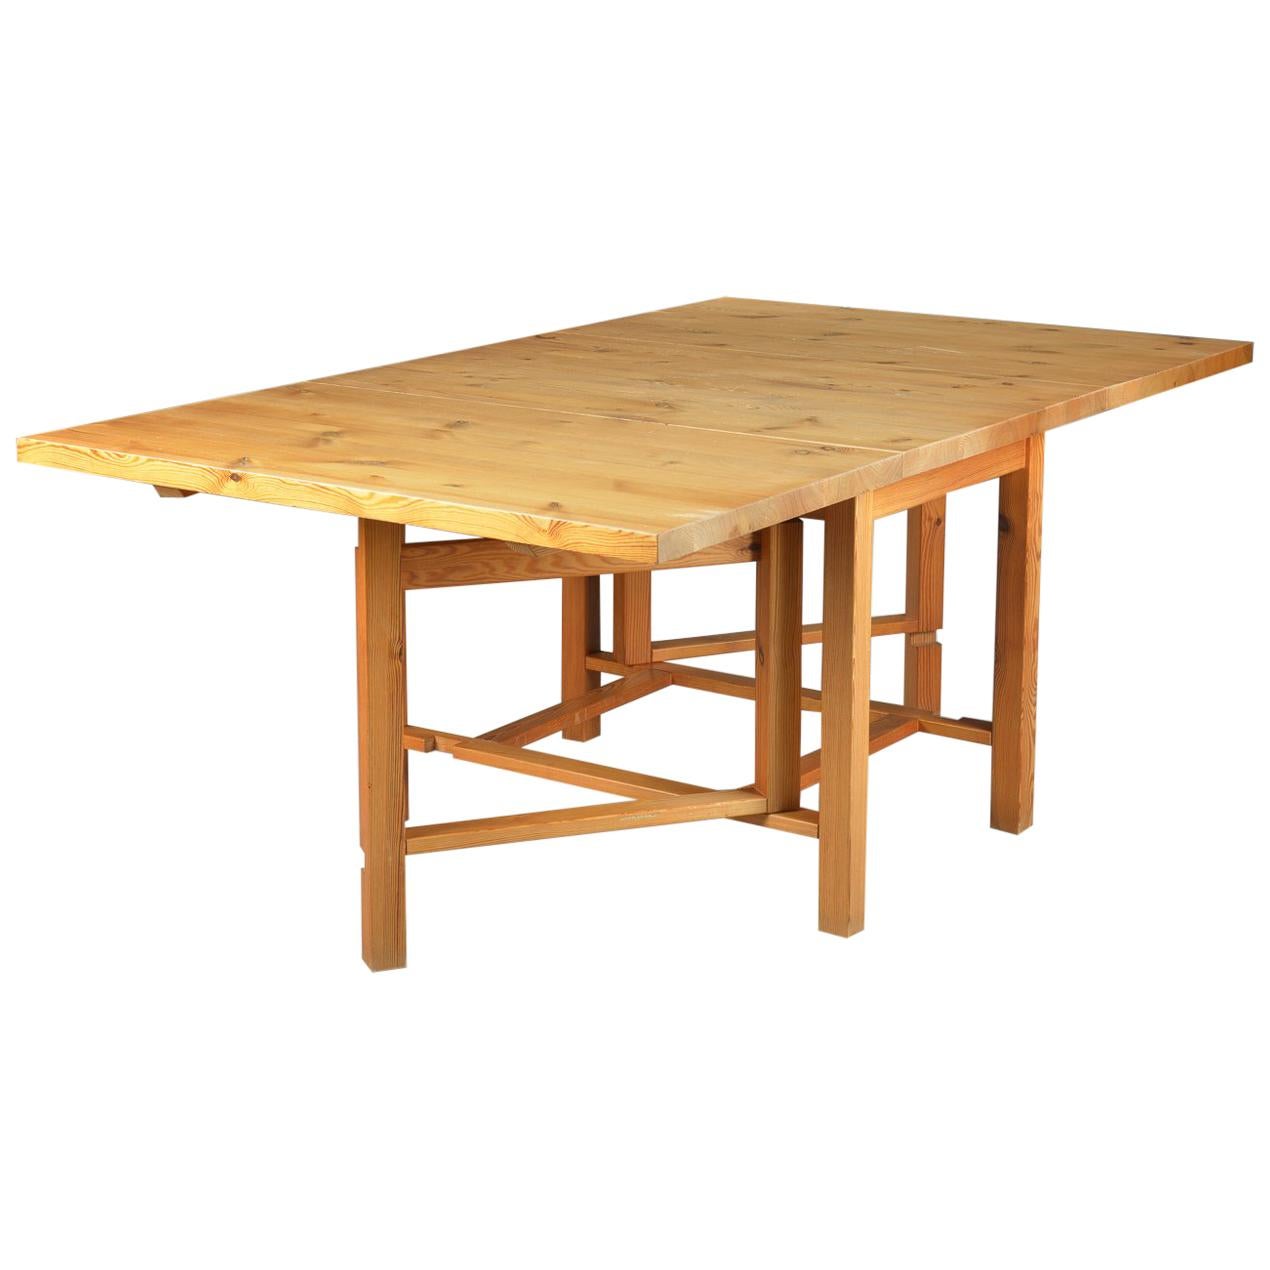 Danish Rustic Extension Dining Table Made From Solid Knotty Pine Planks